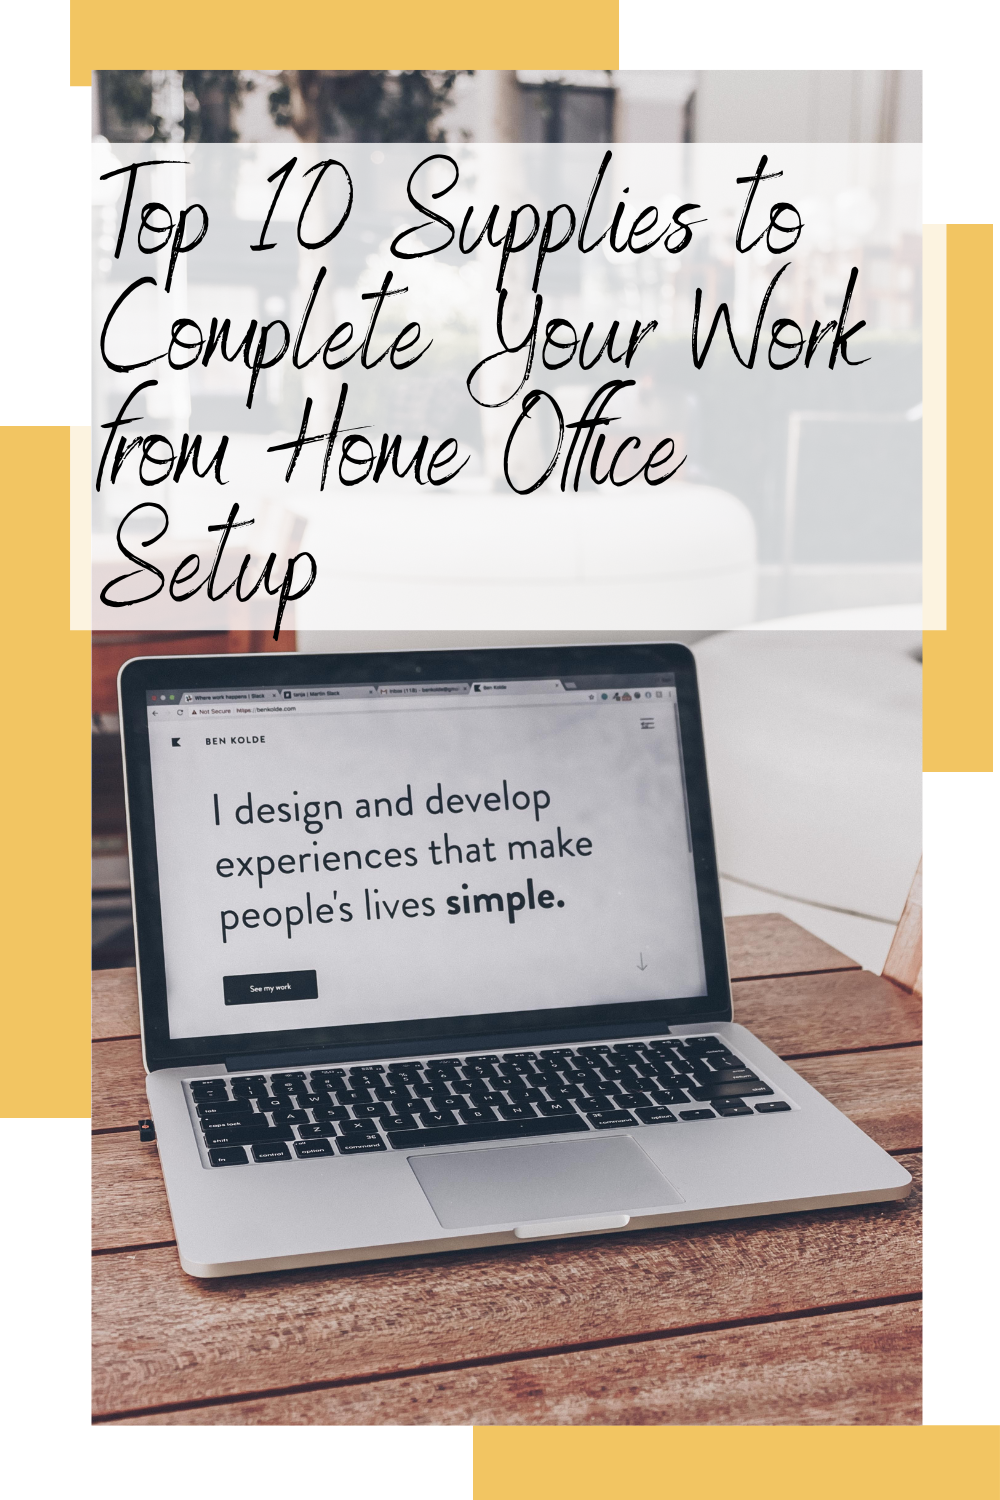 Top 10 Supplies to Complete Your Work from Home Office Setup Pinterest